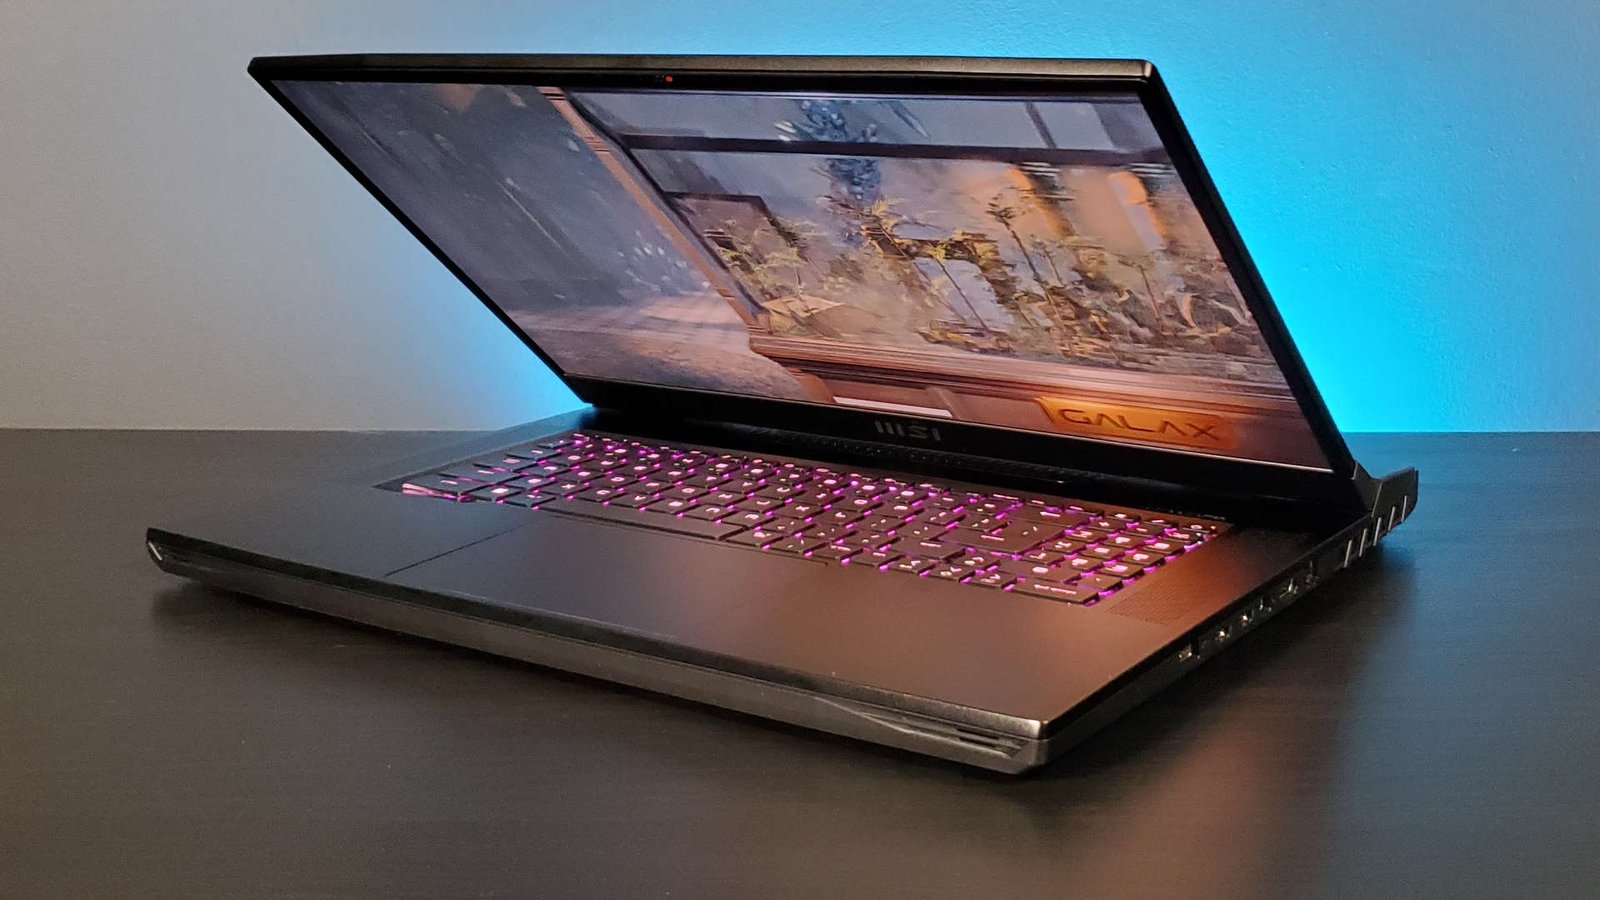 MSI Titan GT77 HX gaming laptop with RTX 4090 and Core i9